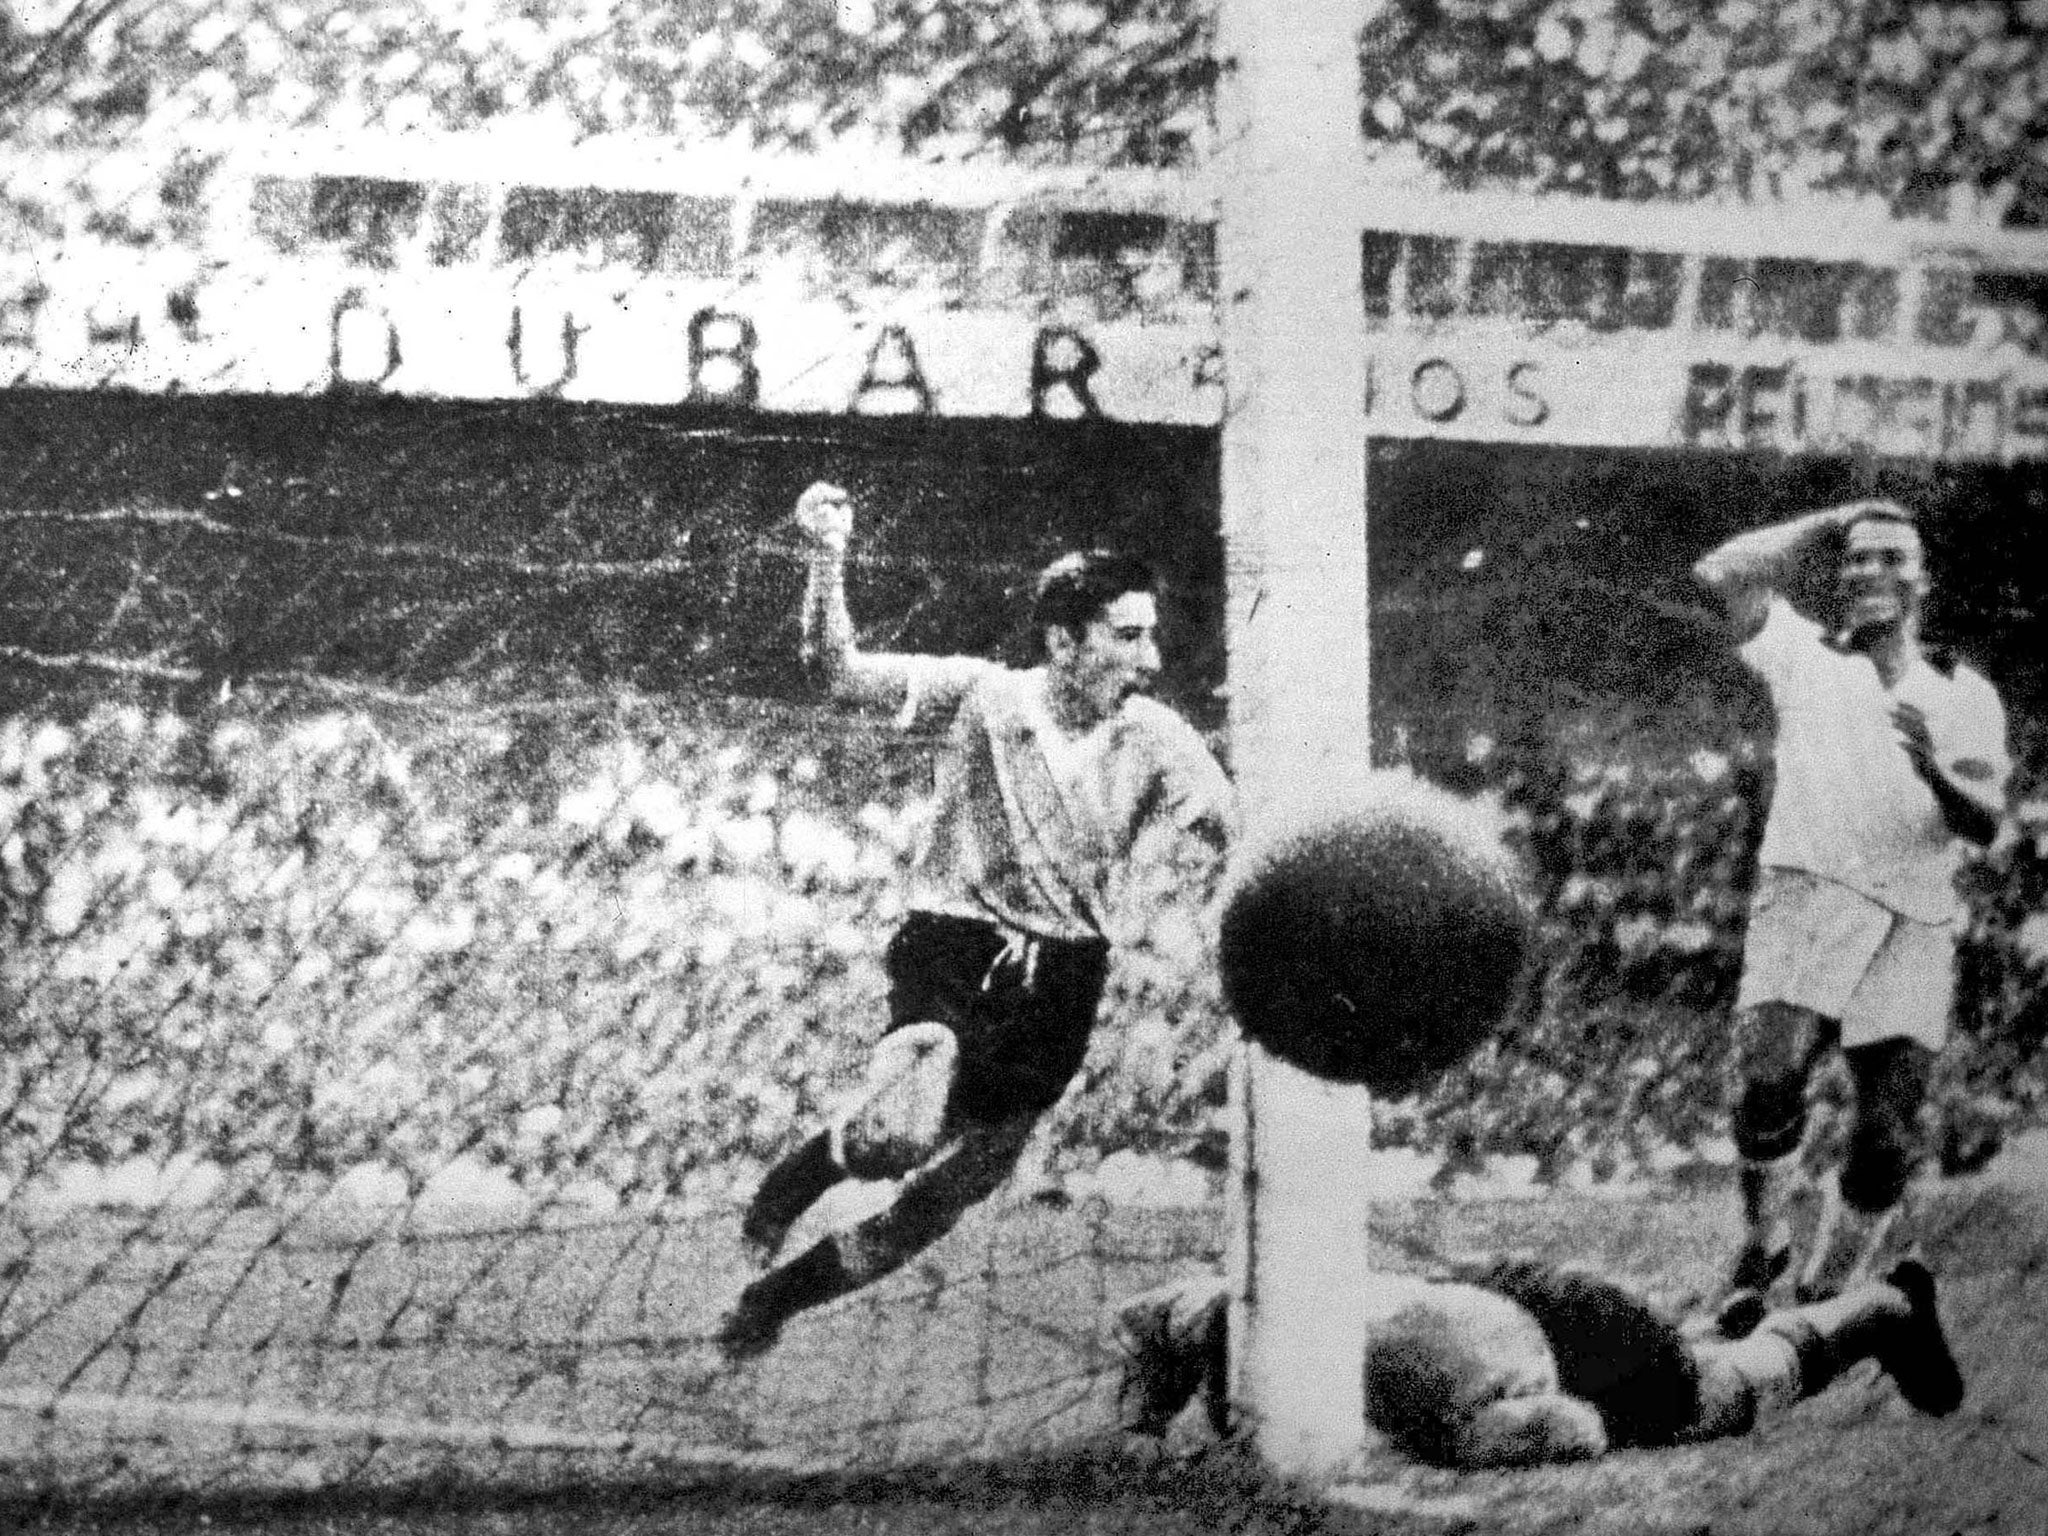 Ghiggia turns away after scoring his famous goal: the Maracana was silenced